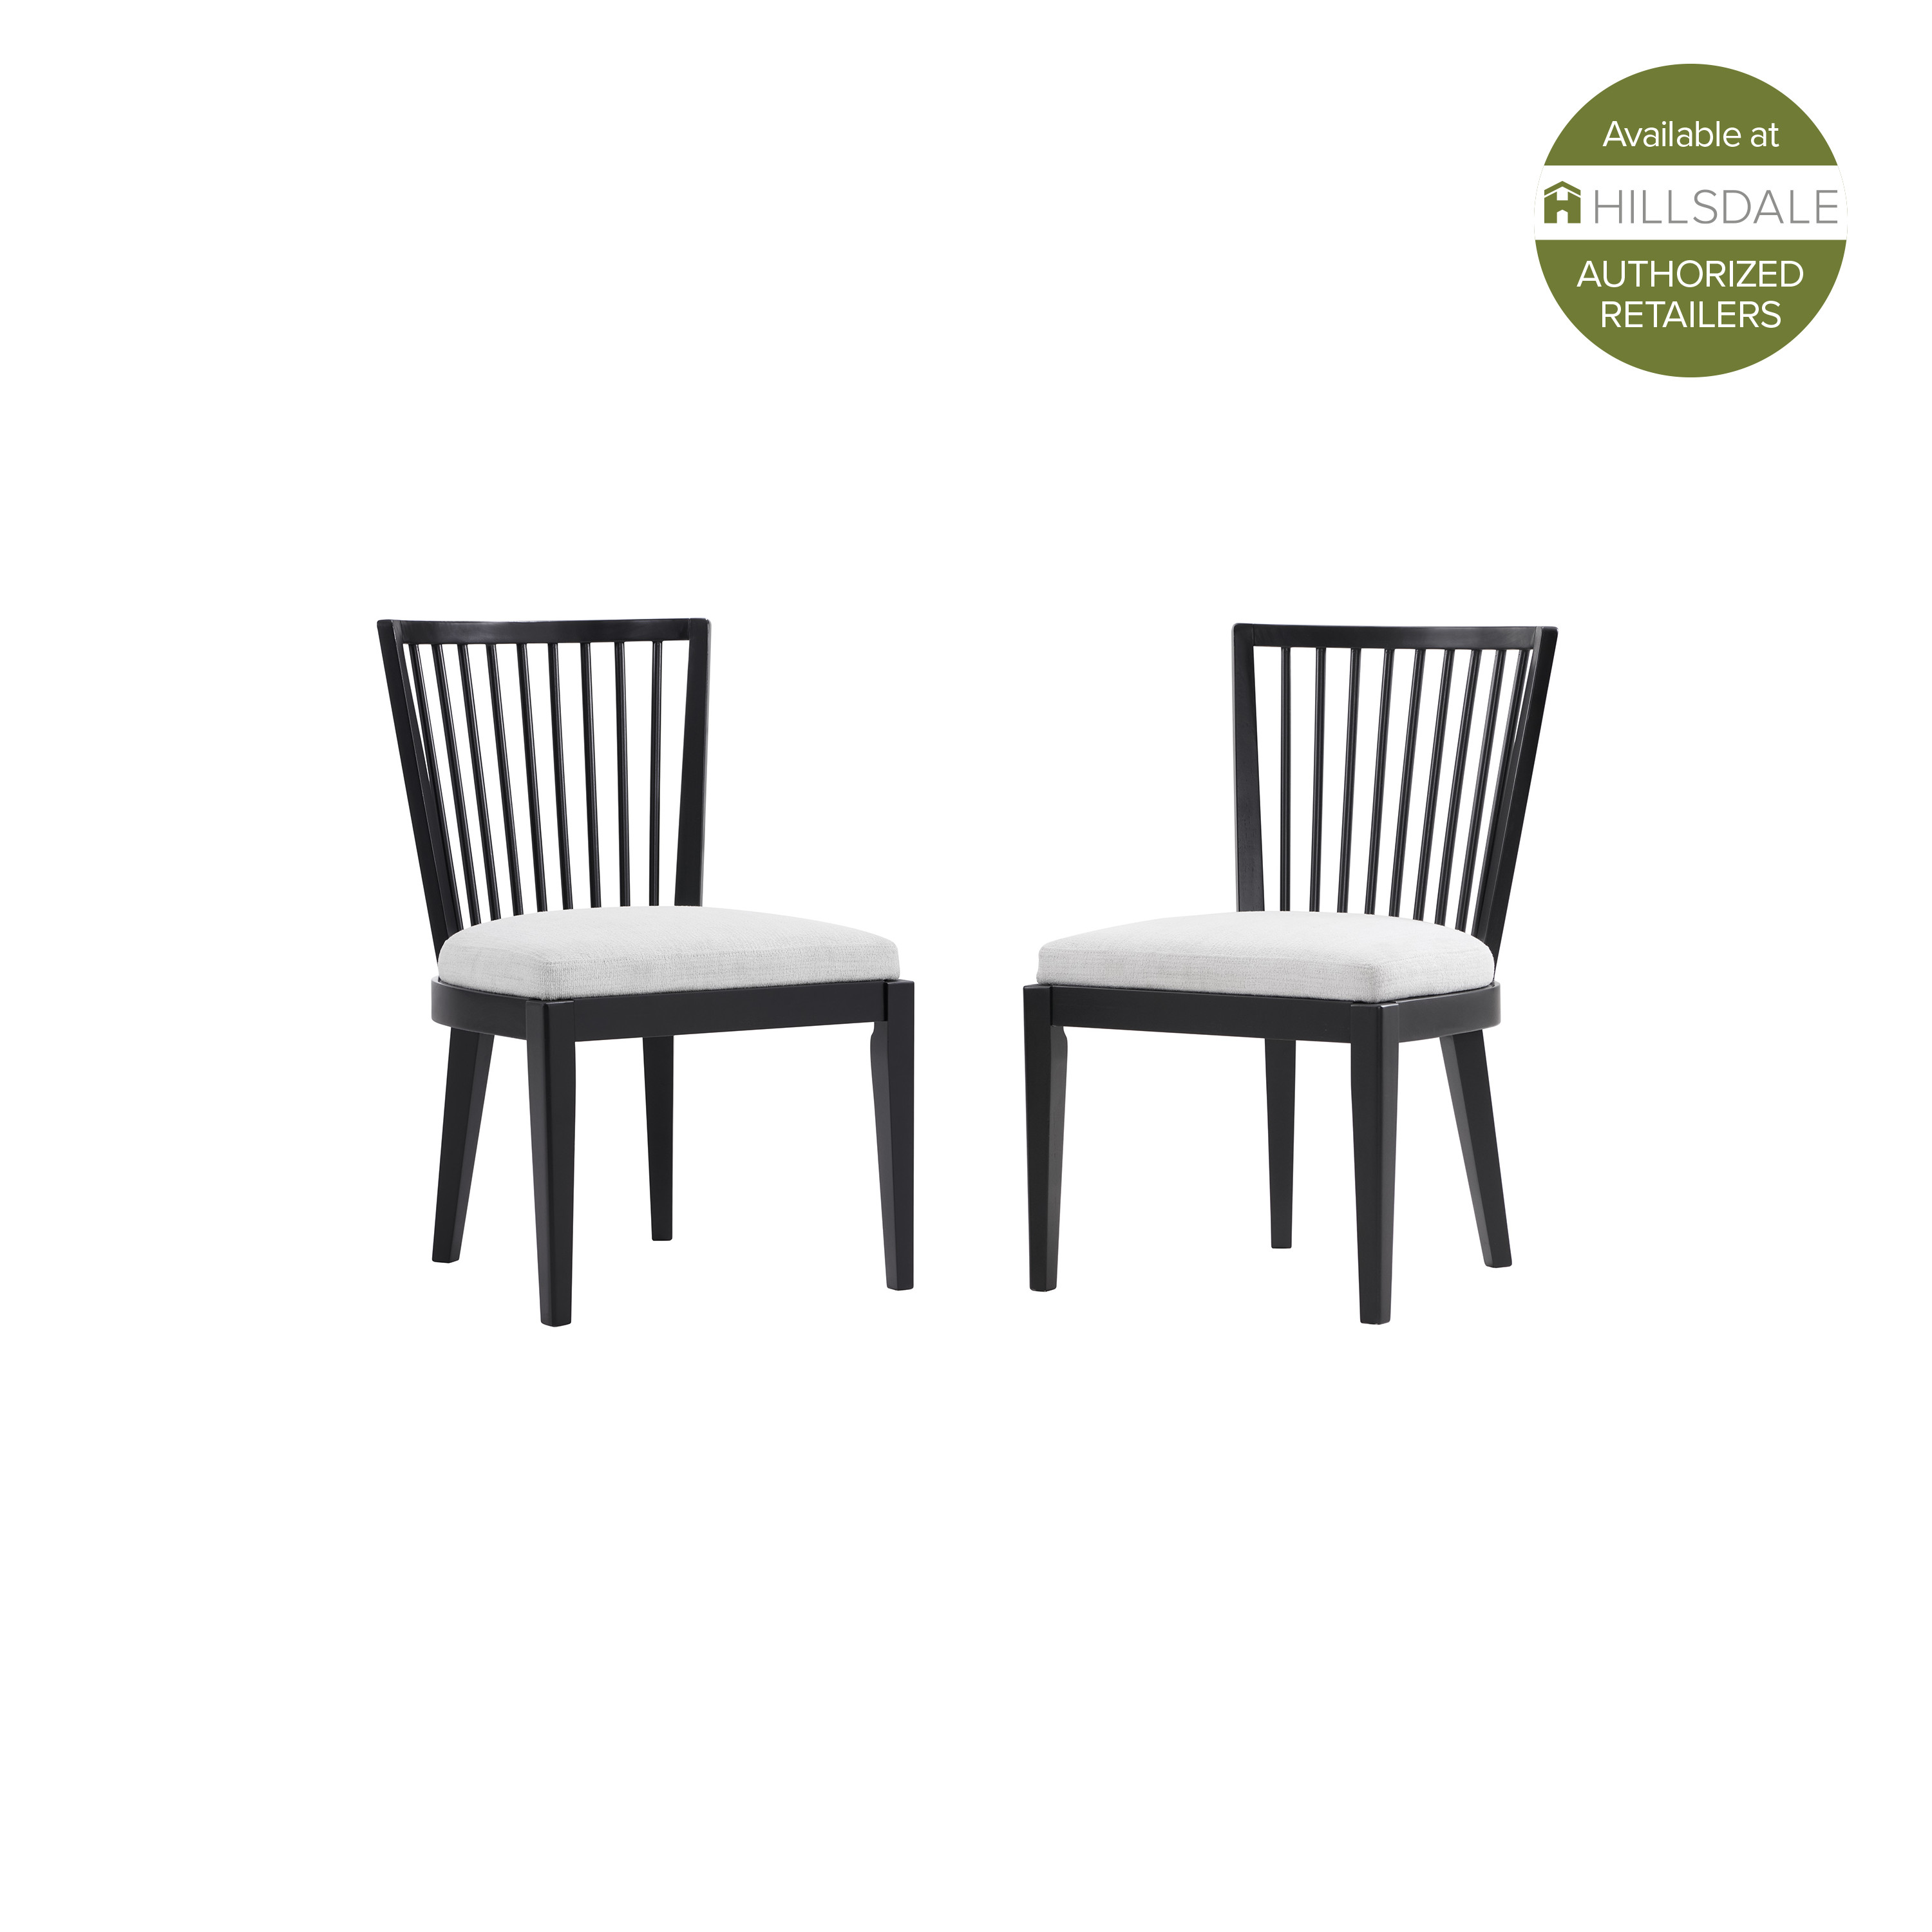 Portsmouth Wood Dining Chair, Set of 2